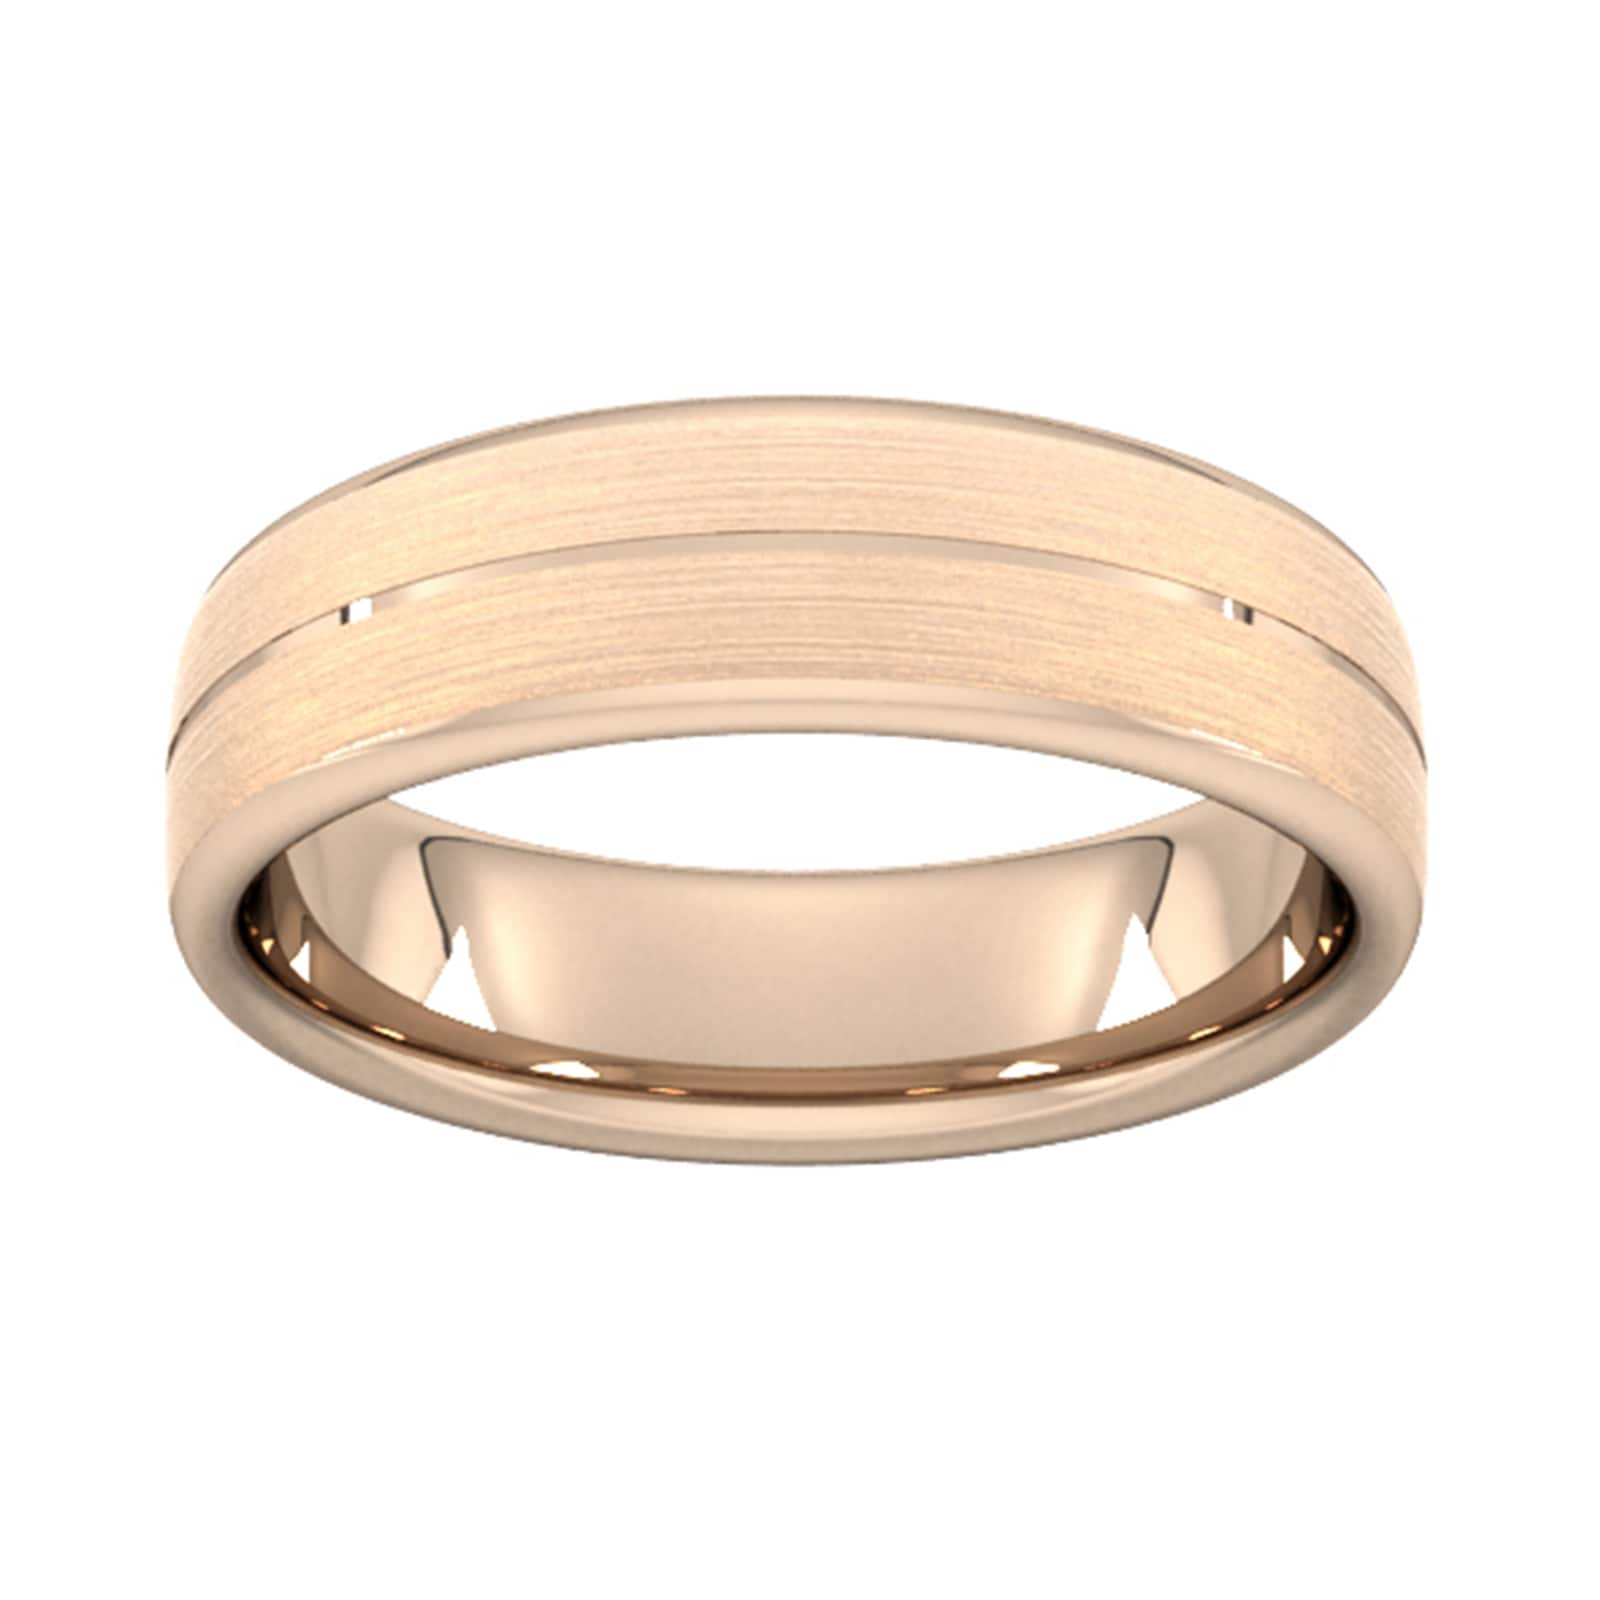 6mm Traditional Court Heavy Centre Groove With Chamfered Edge Wedding Ring In 18 Carat Rose Gold - Ring Size K